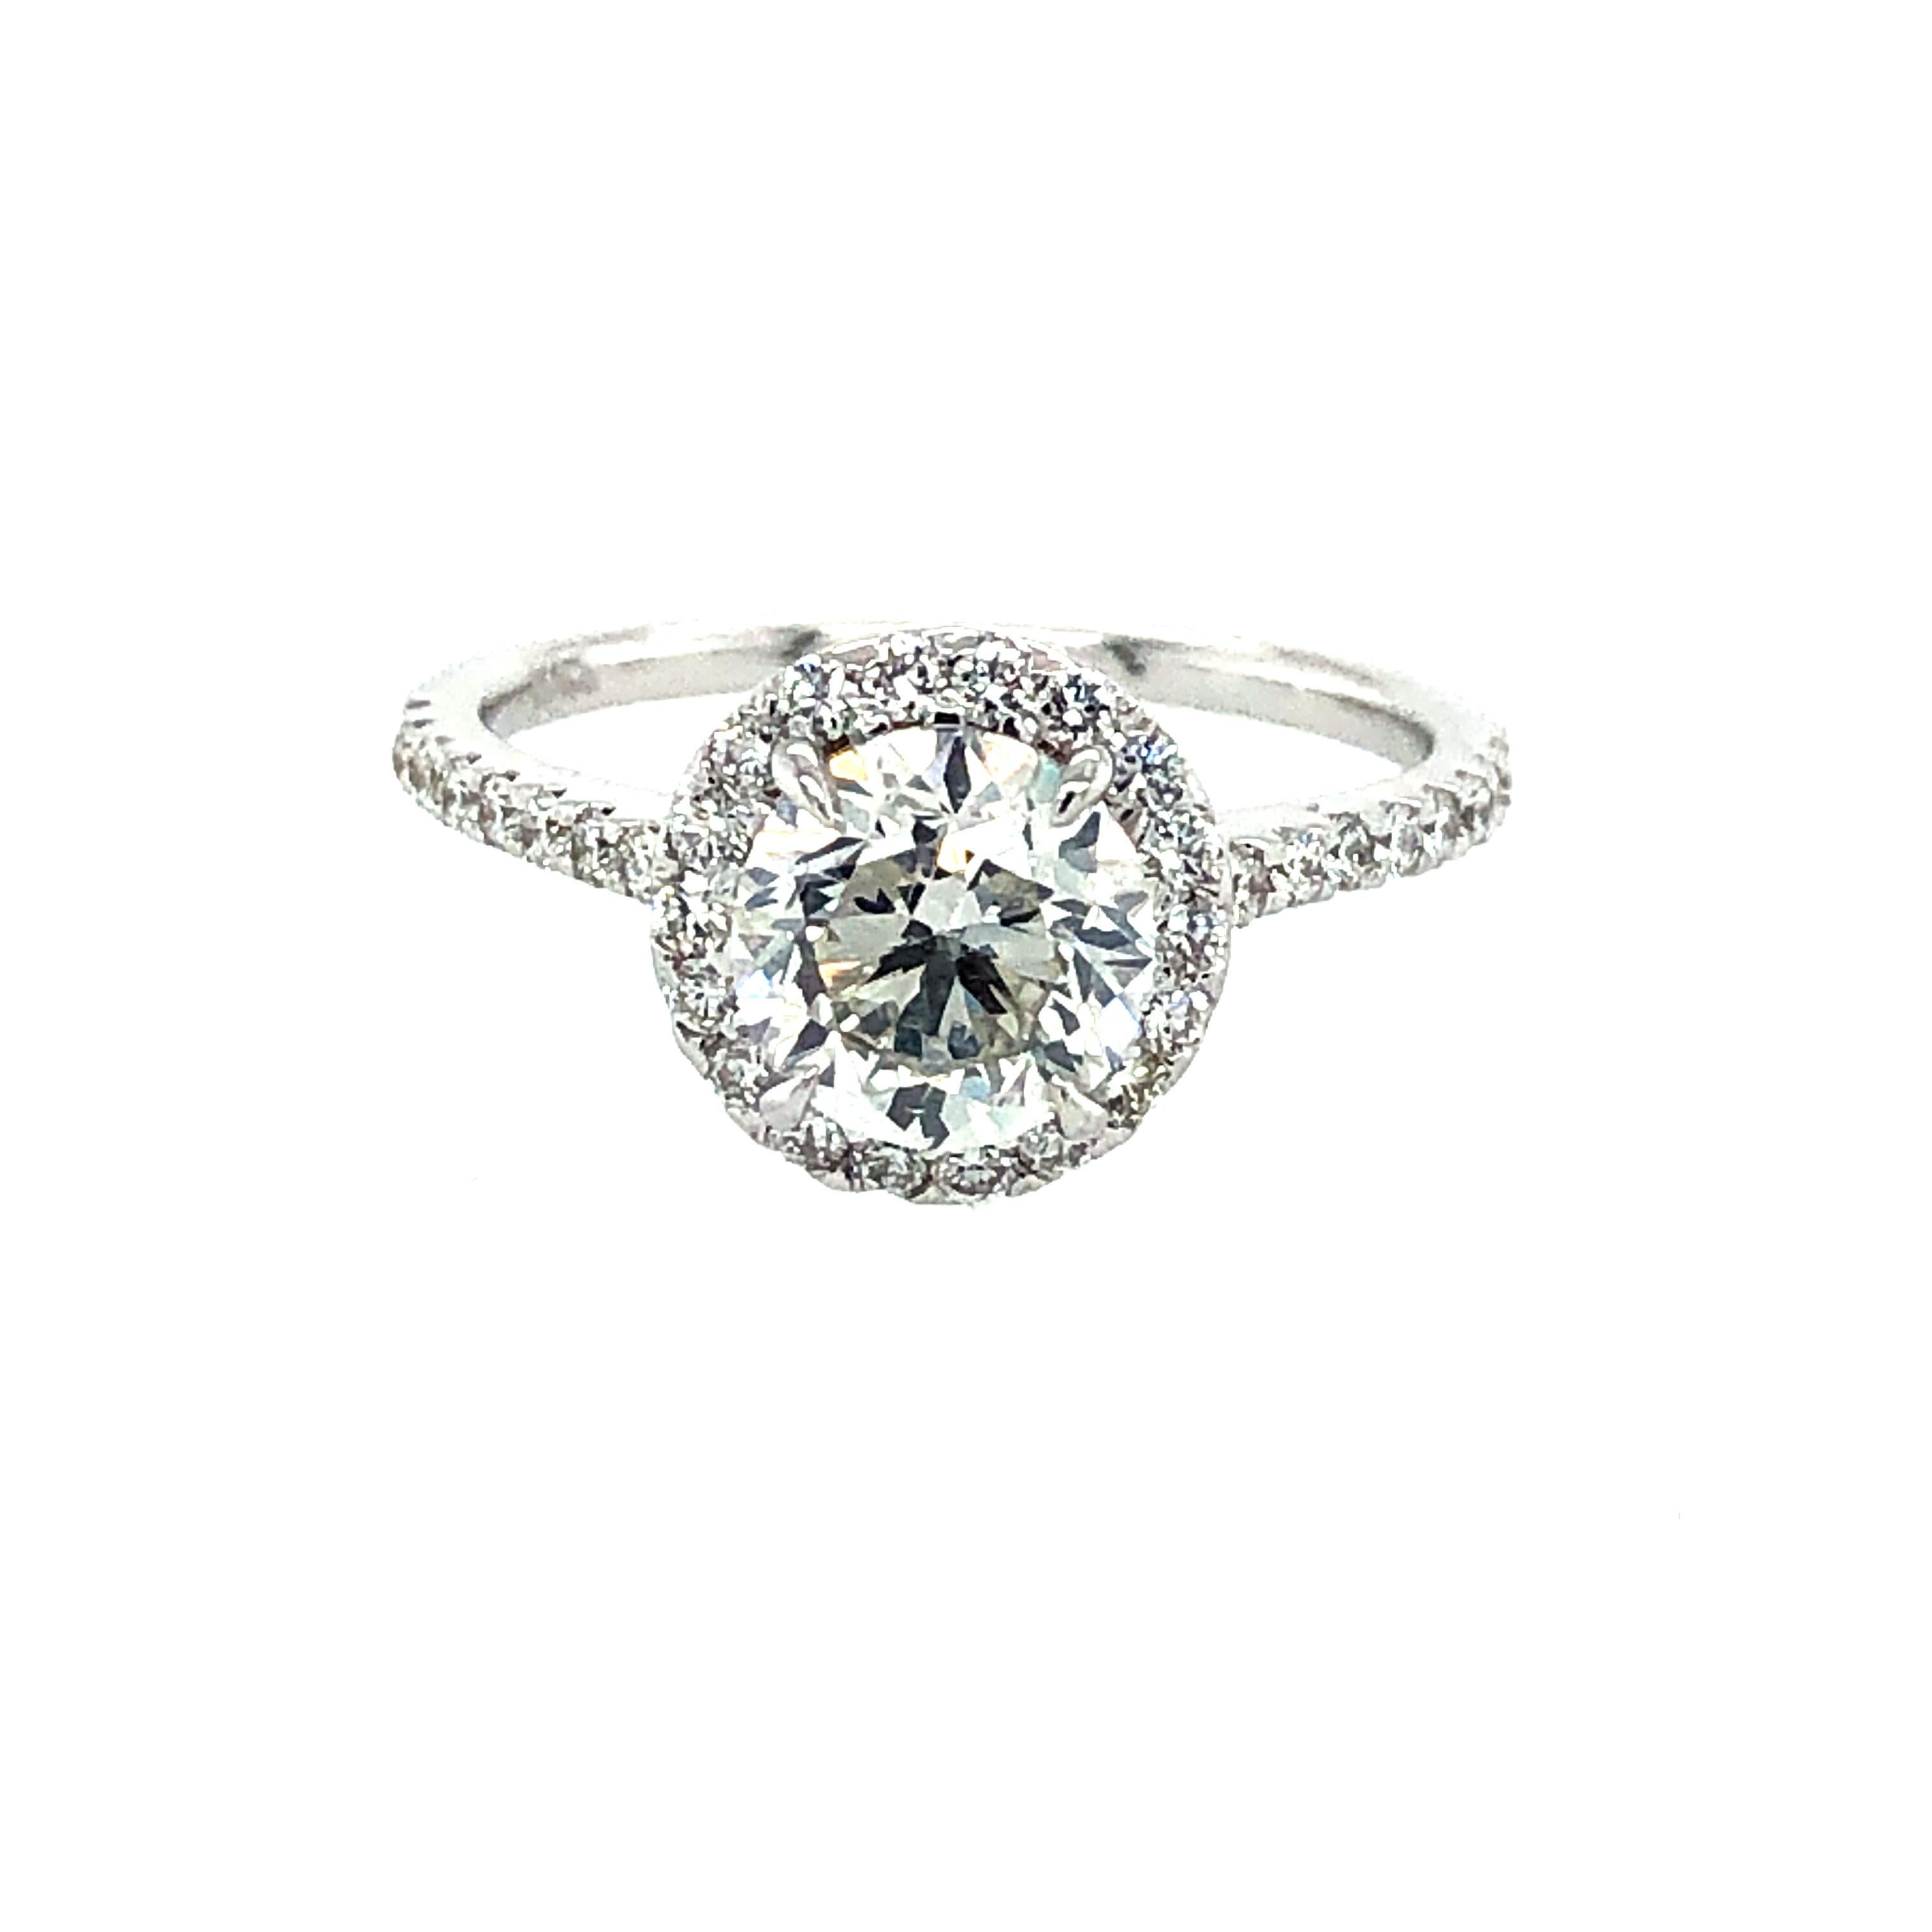 Offered here is a beautiful GIA certified 1.50 carat round brilliant cut diamond set in a classic halo diamond 18k white gold ring. The center diamond comes with a GIA cert.# 5201877158 stating 
Shape: round brilliant 
Measurements: 7.01-7.10 x 4.59